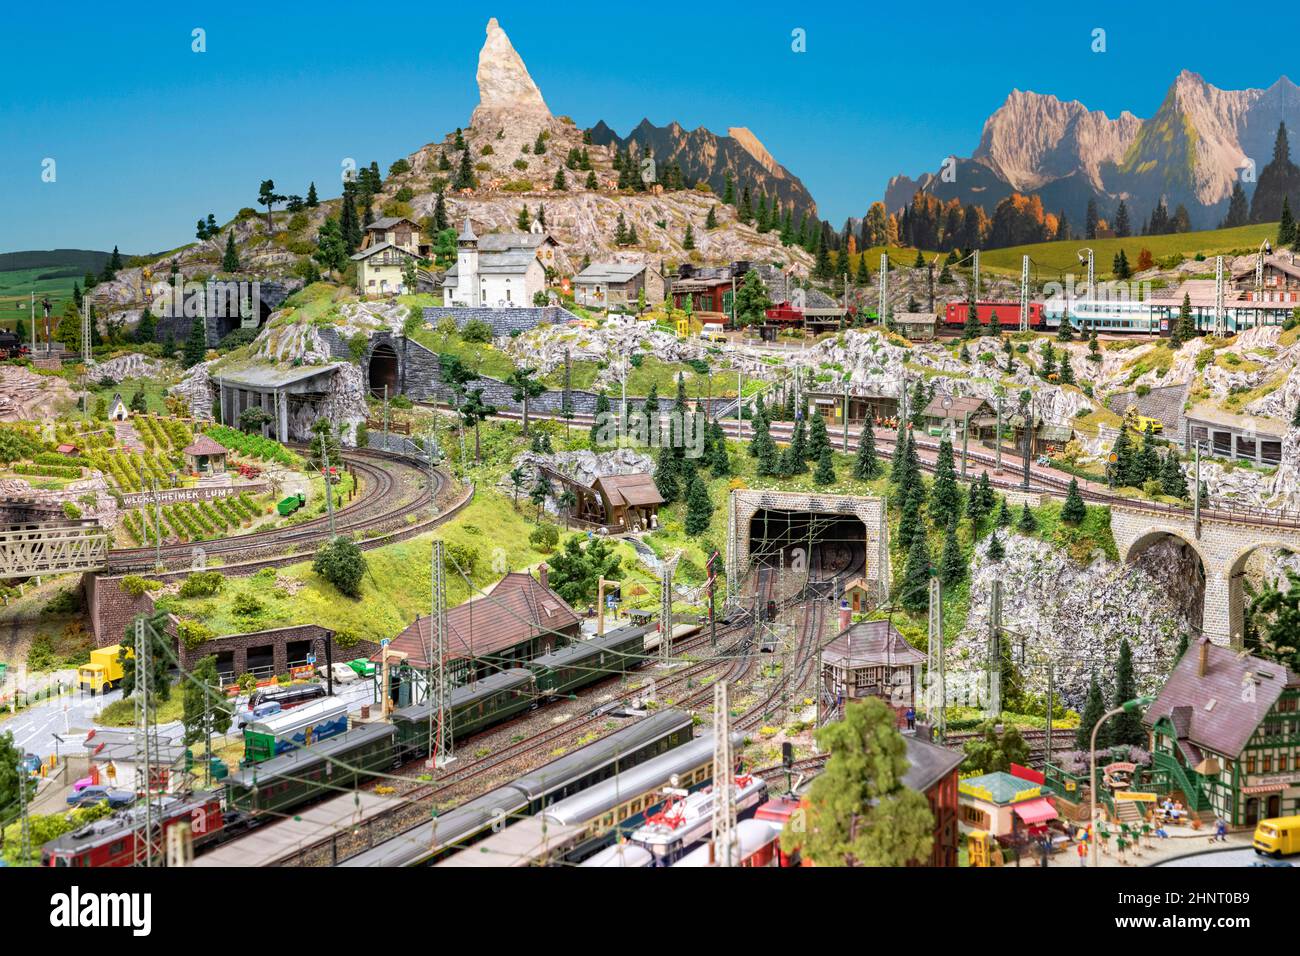 detail of model railway with landscape, villages and operating train Stock Photo